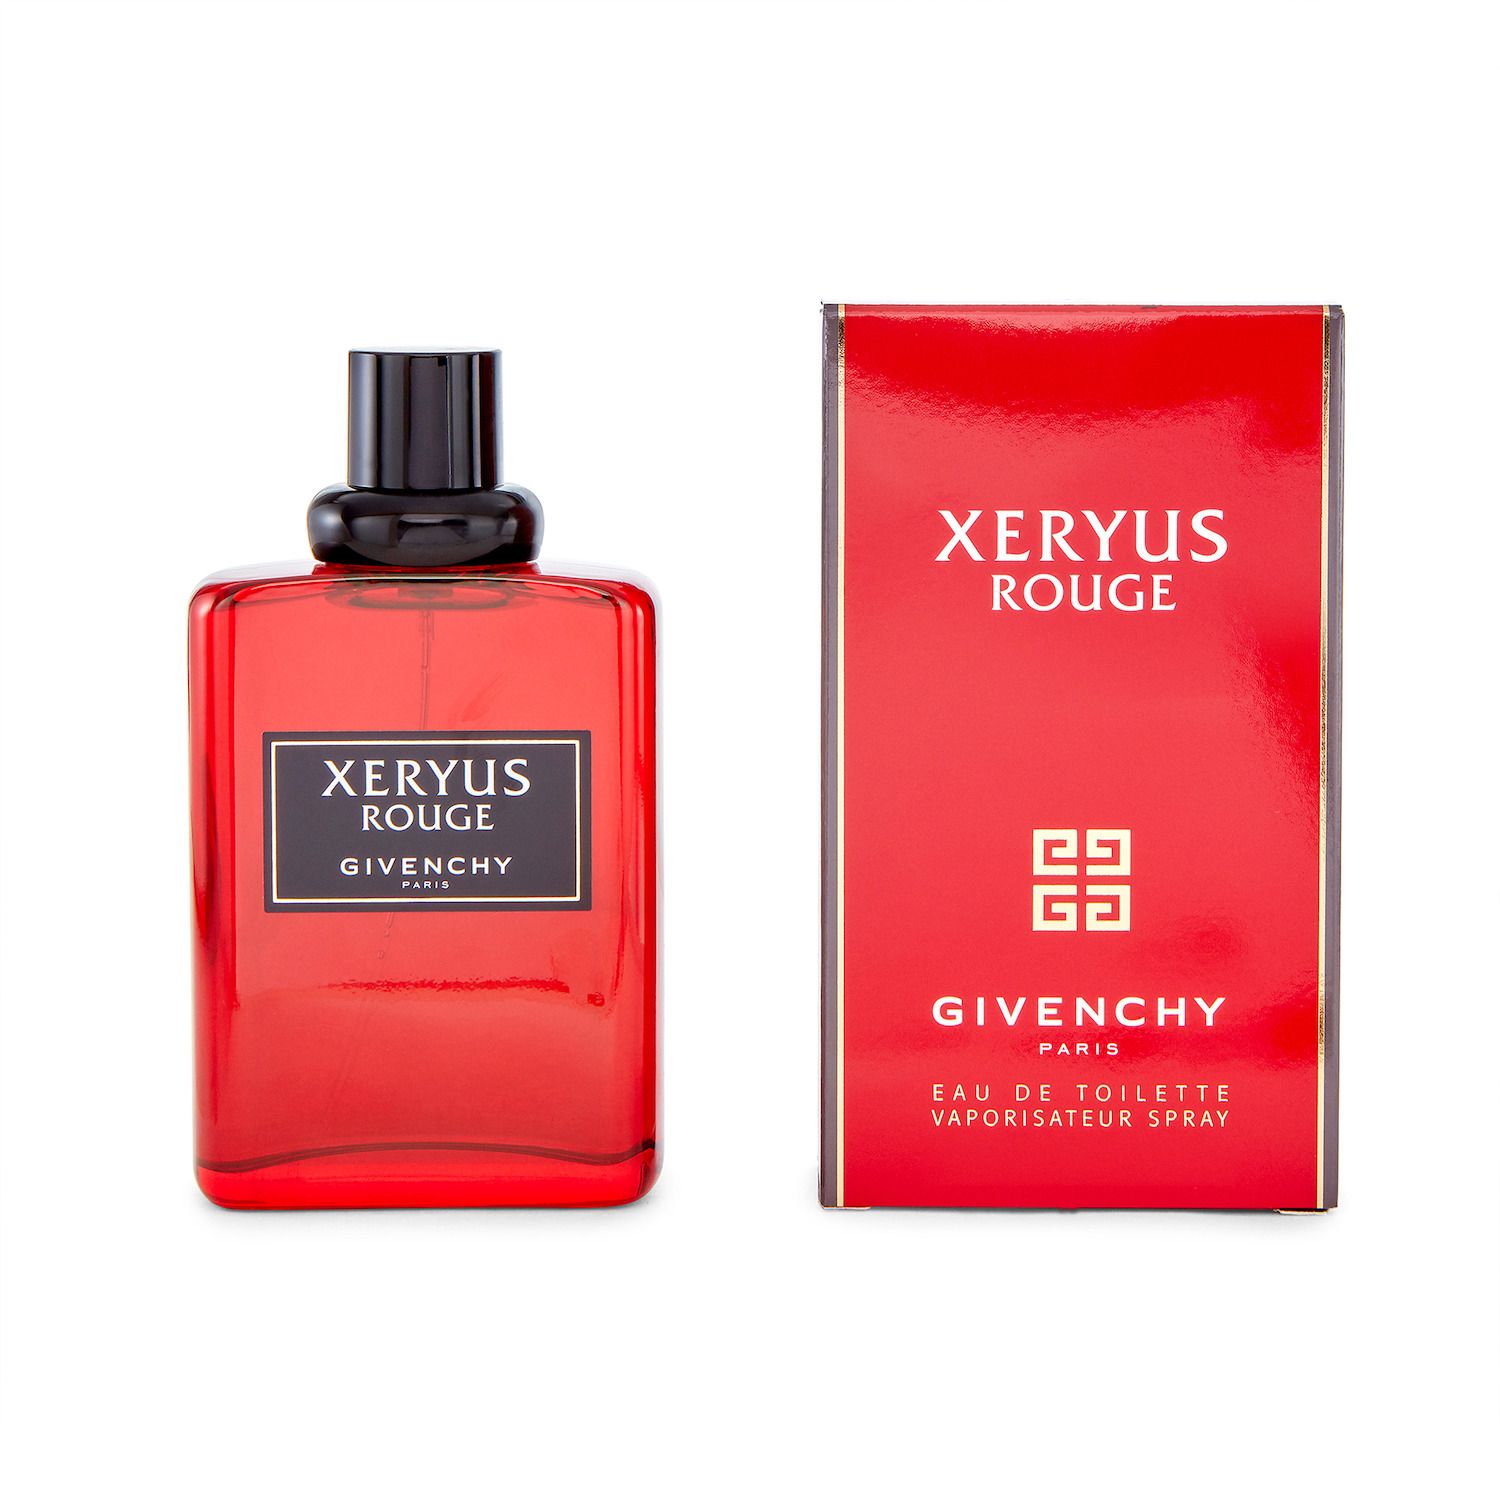 xeryus rouge cologne